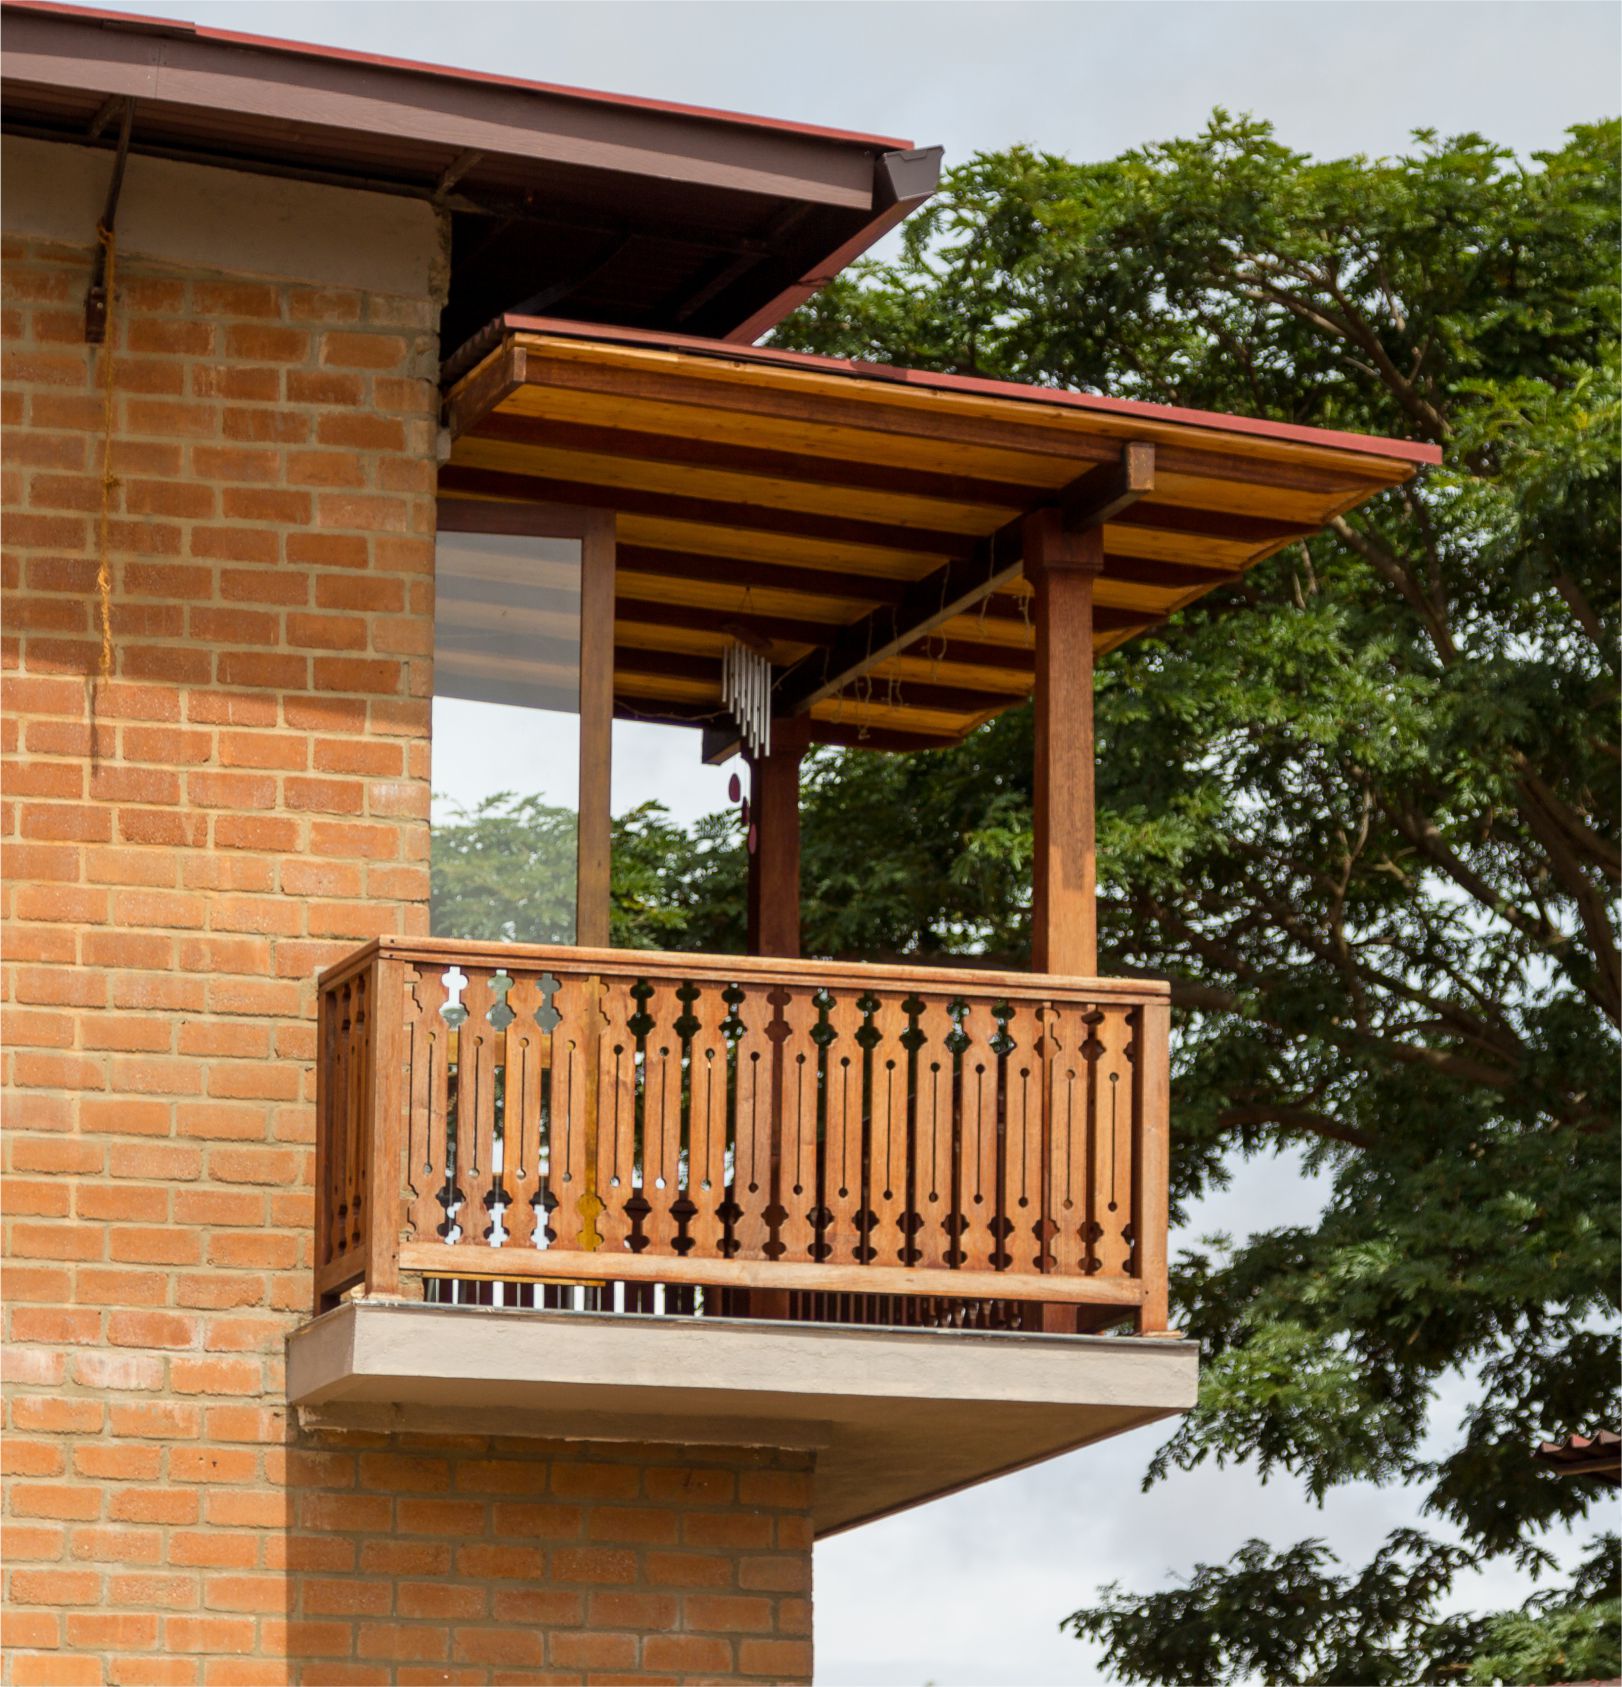 Handcrafted timber balcony railing and roof